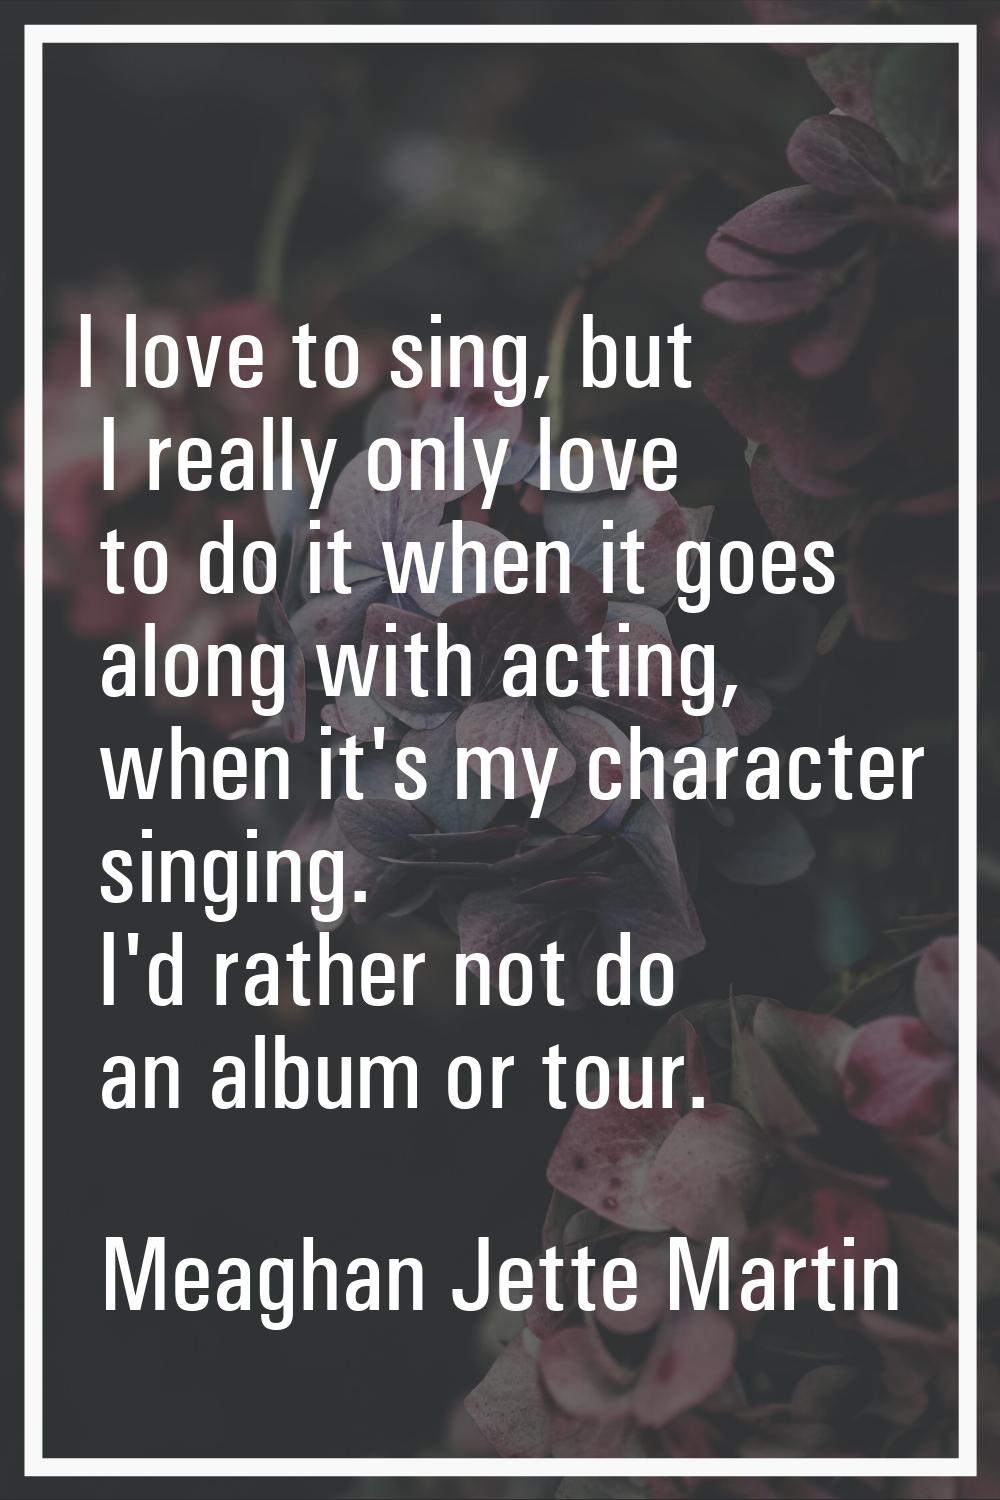 I love to sing, but I really only love to do it when it goes along with acting, when it's my charac